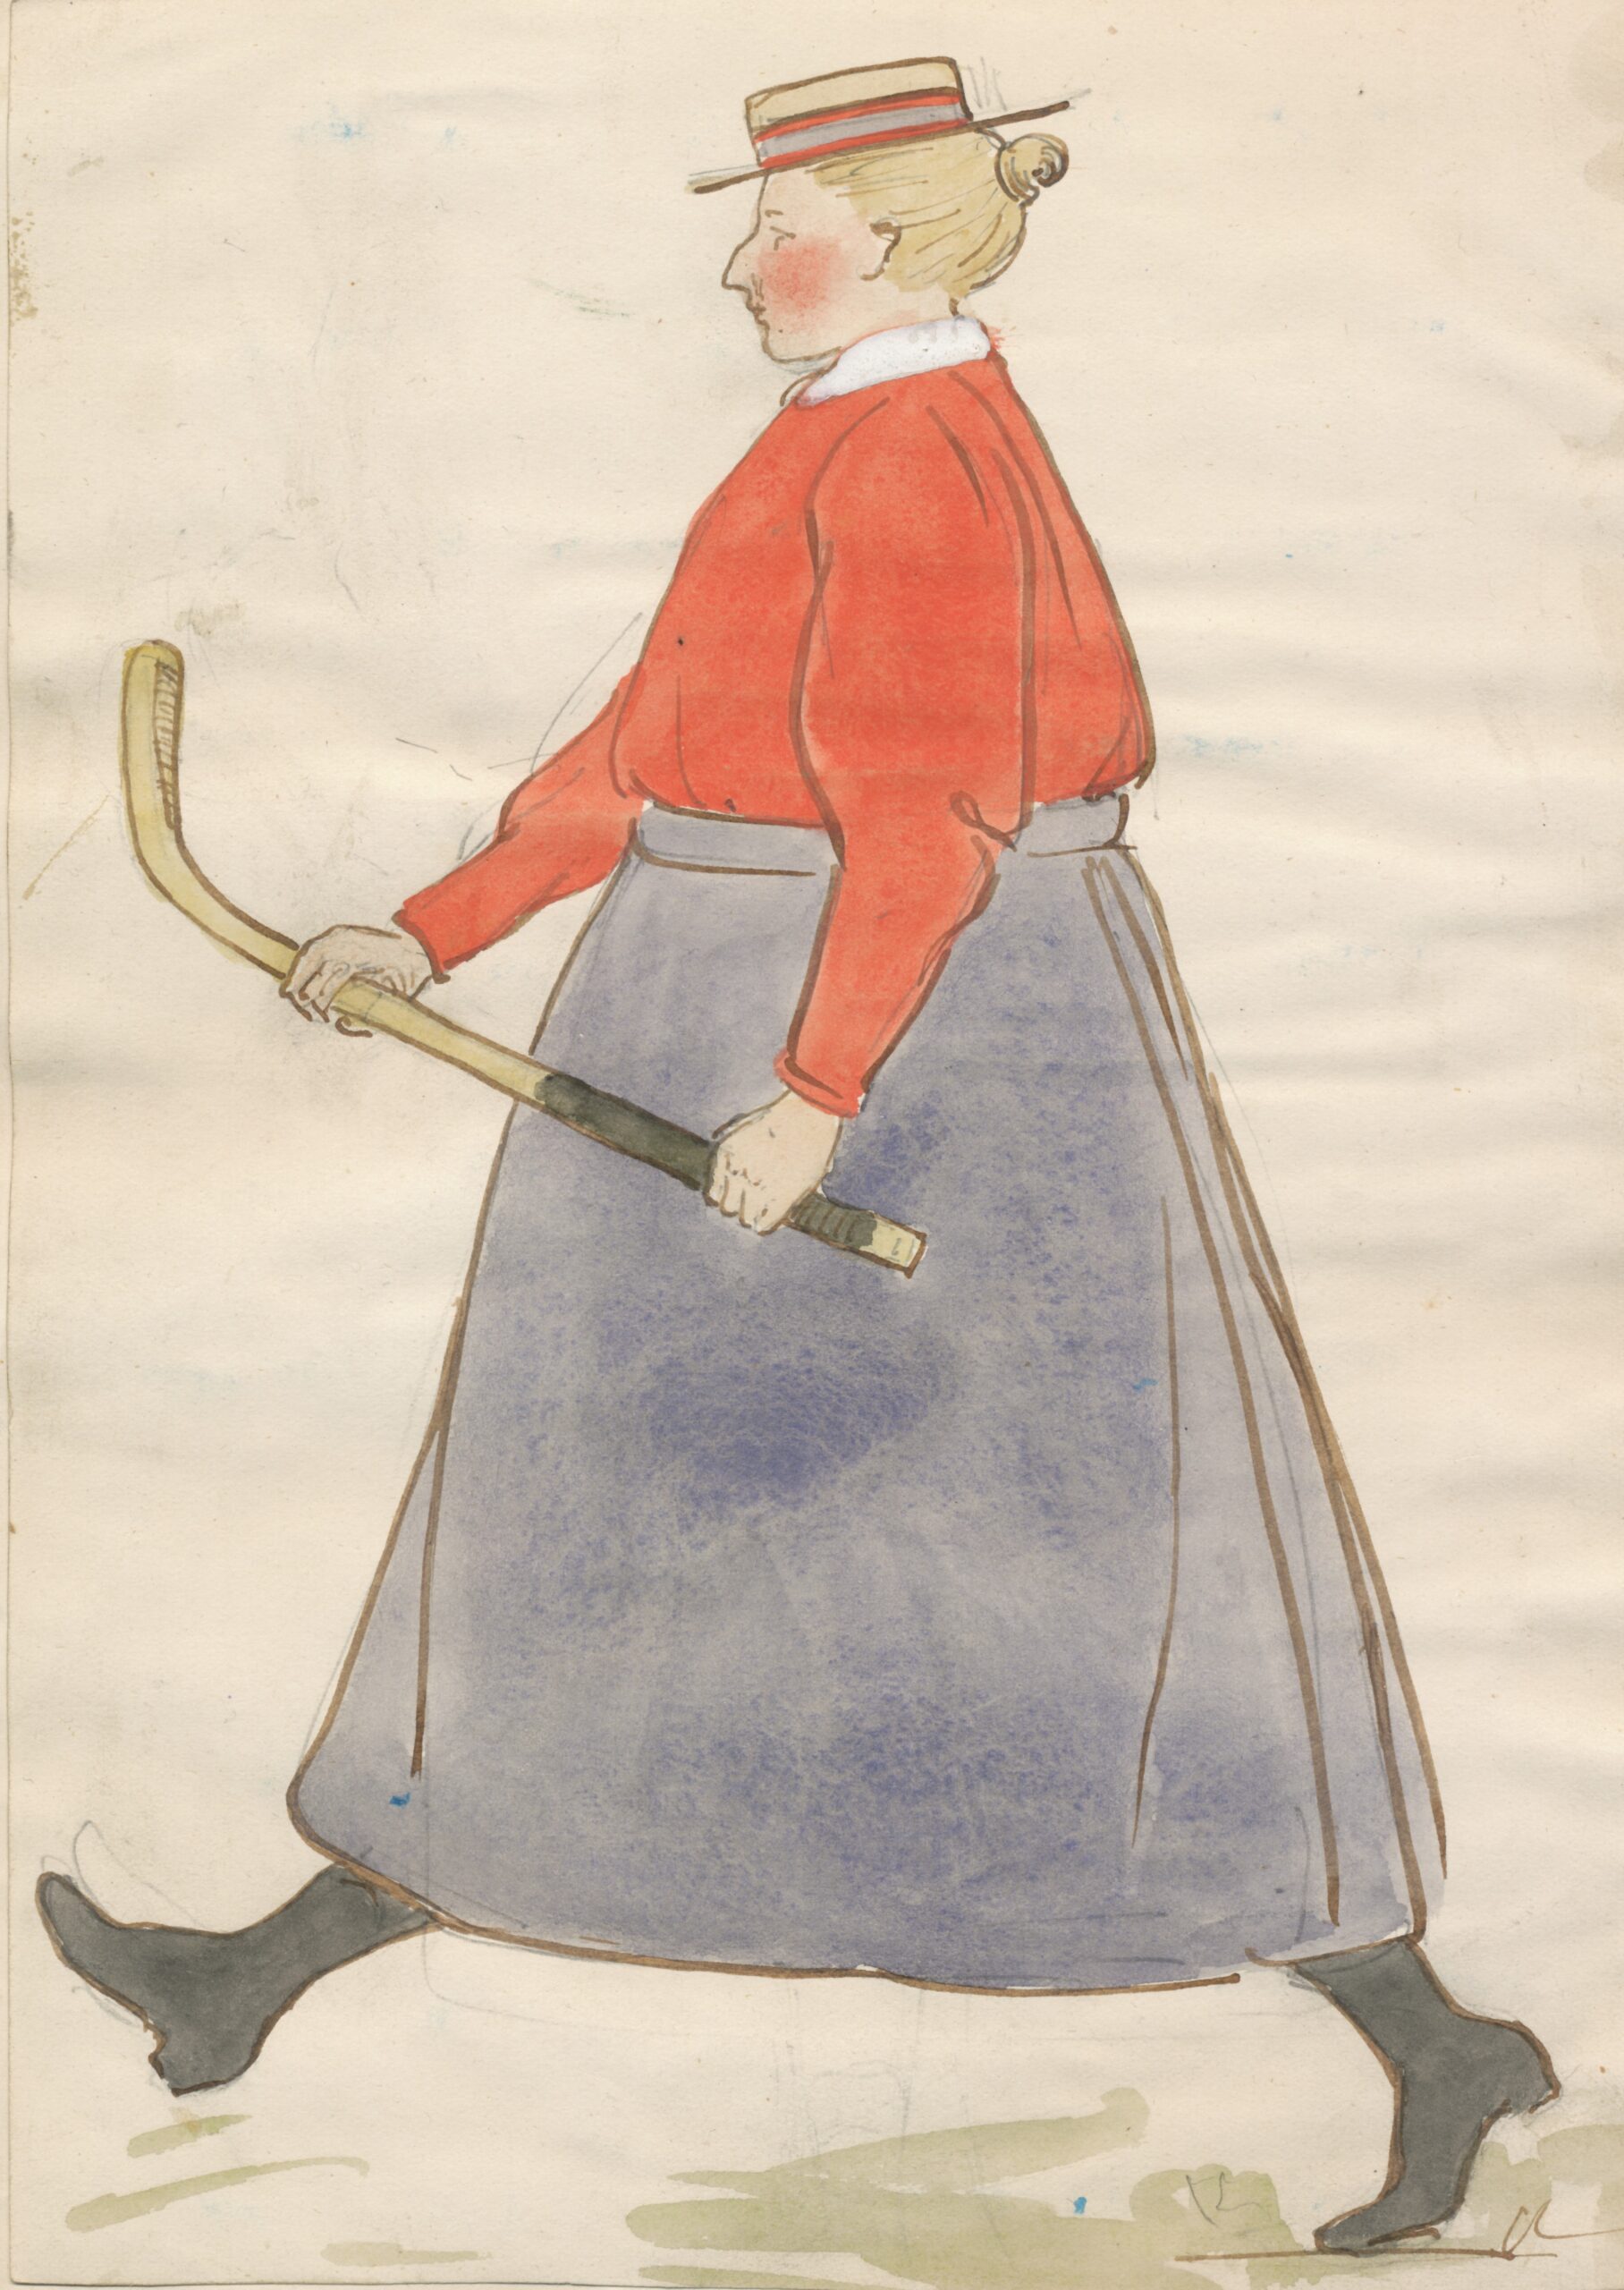 Watercolour illustration from a scrapbook entitled ‘Hockey Jottings’, 1898.